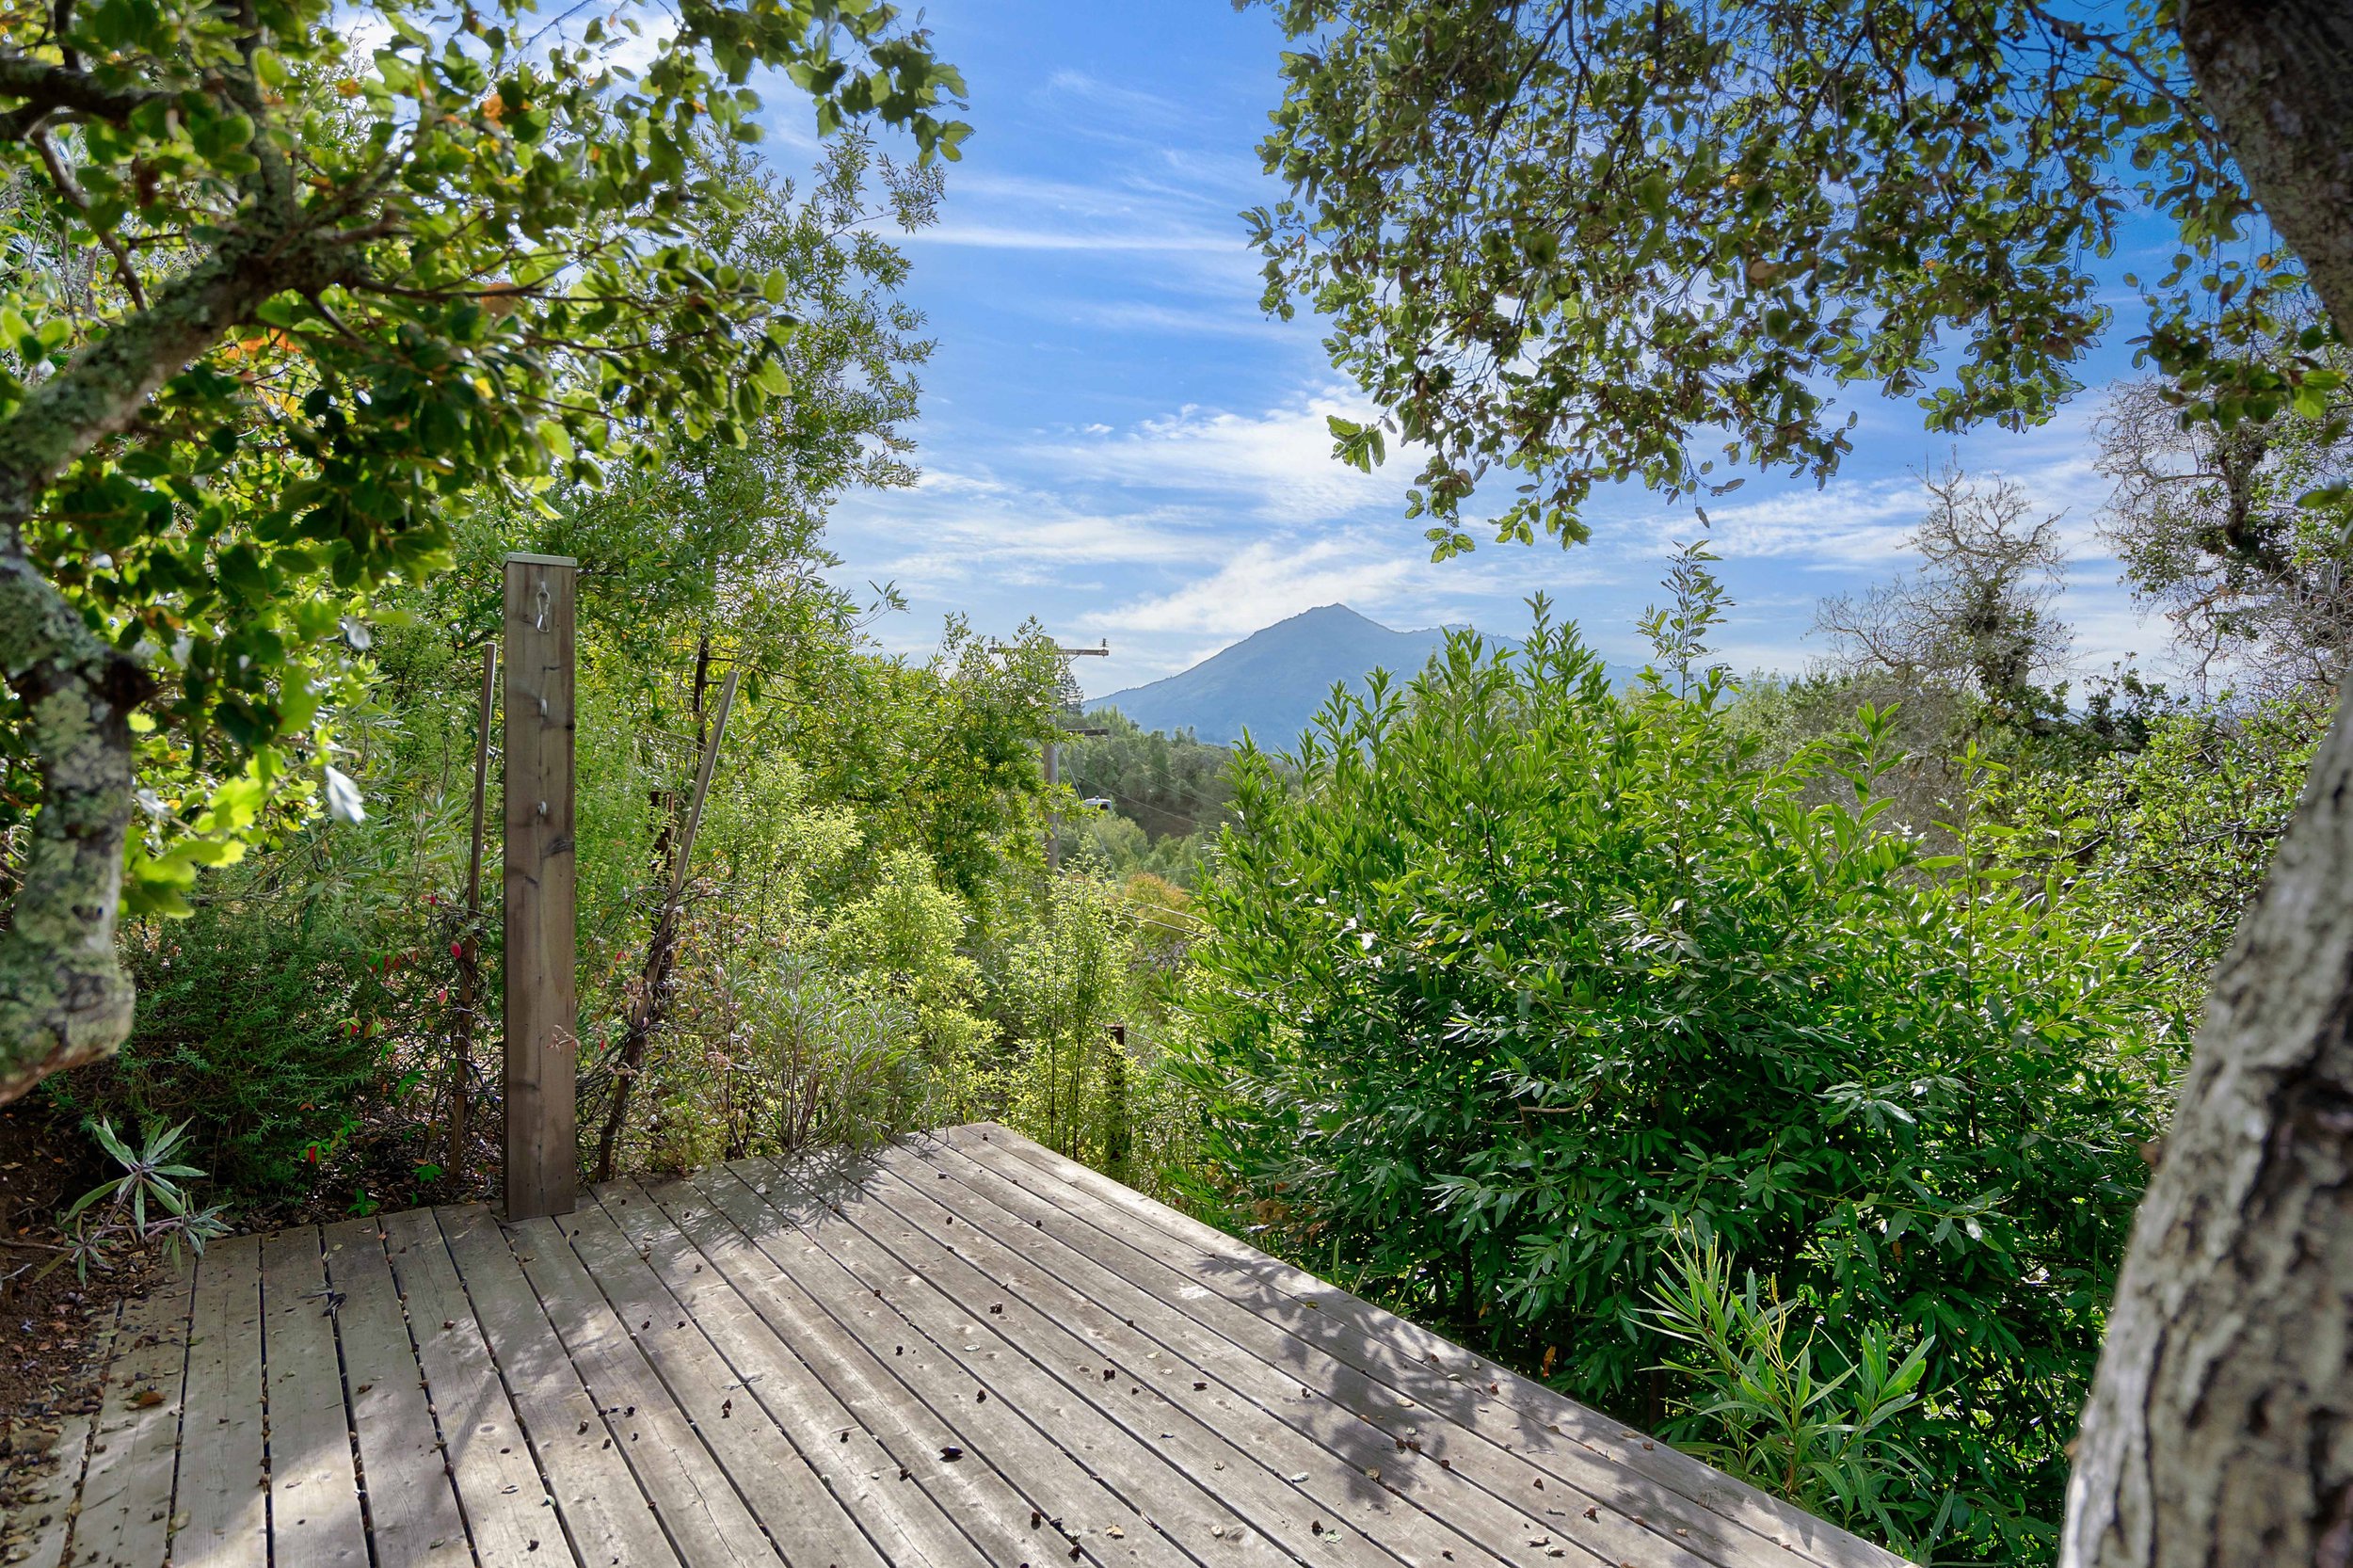 7 Meyer Road San Rafael Real Estate For Sale by Marin County Top Realtor Allie Fornesi at Own Marin Real Estate-38.jpg